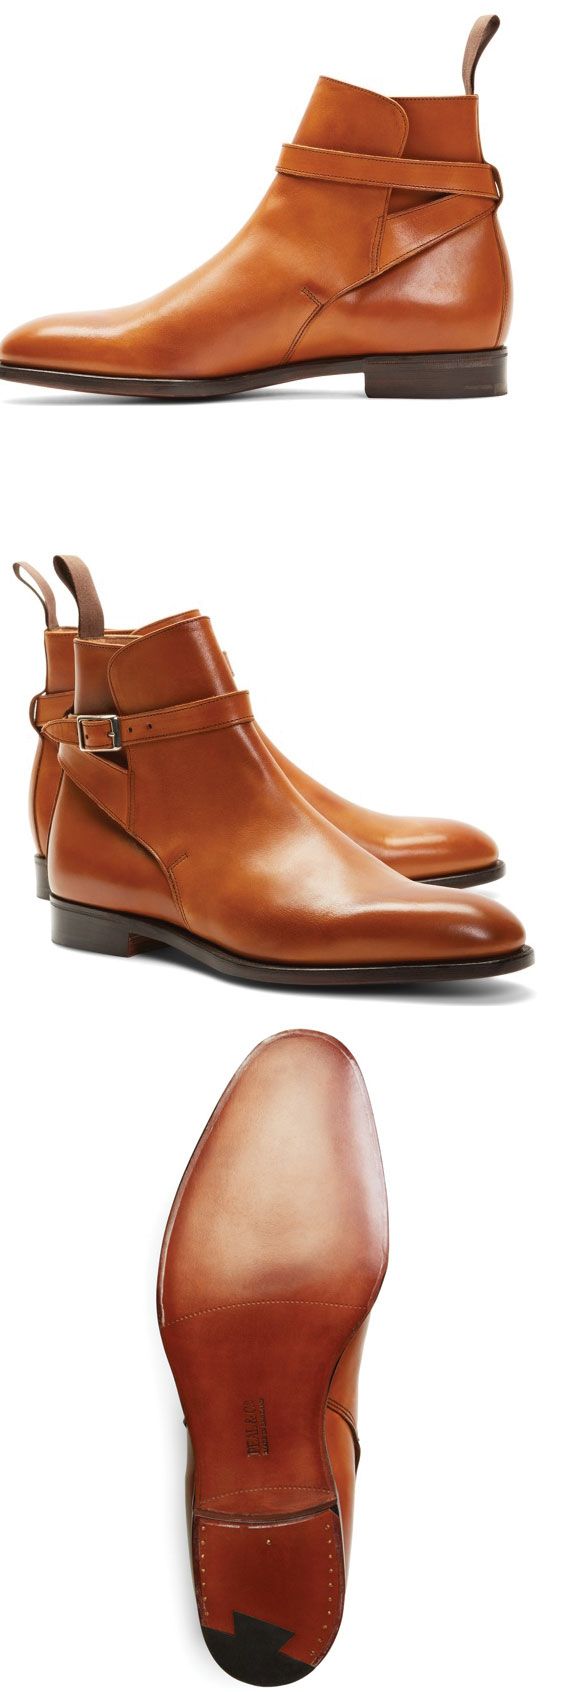 Brooks Brothers Peal & Co.® Leather Ankle Strap Buckle Boots $698